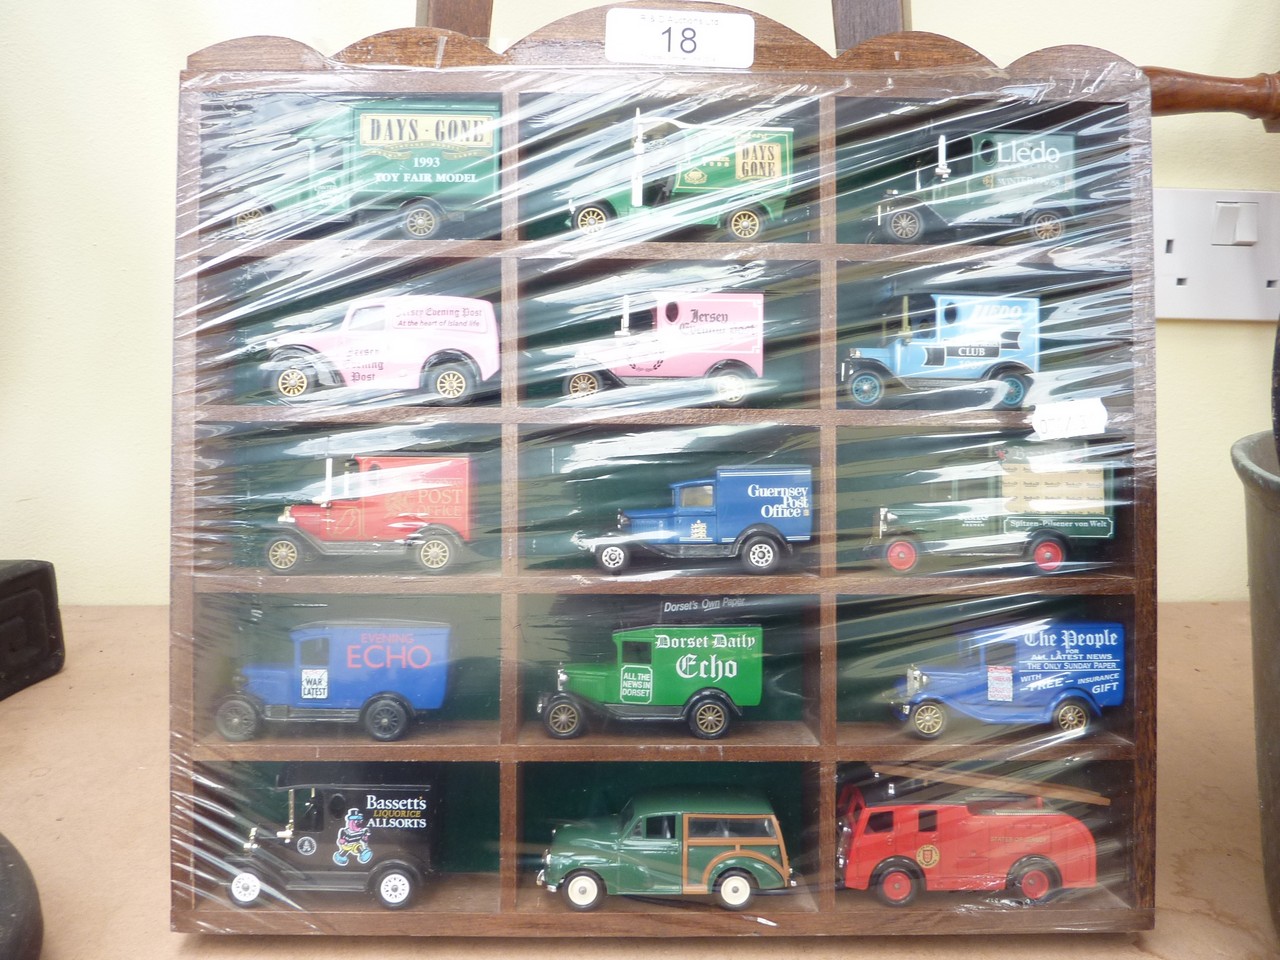 A selection of Lledo & Days Gone die-cast models in a display cabinet